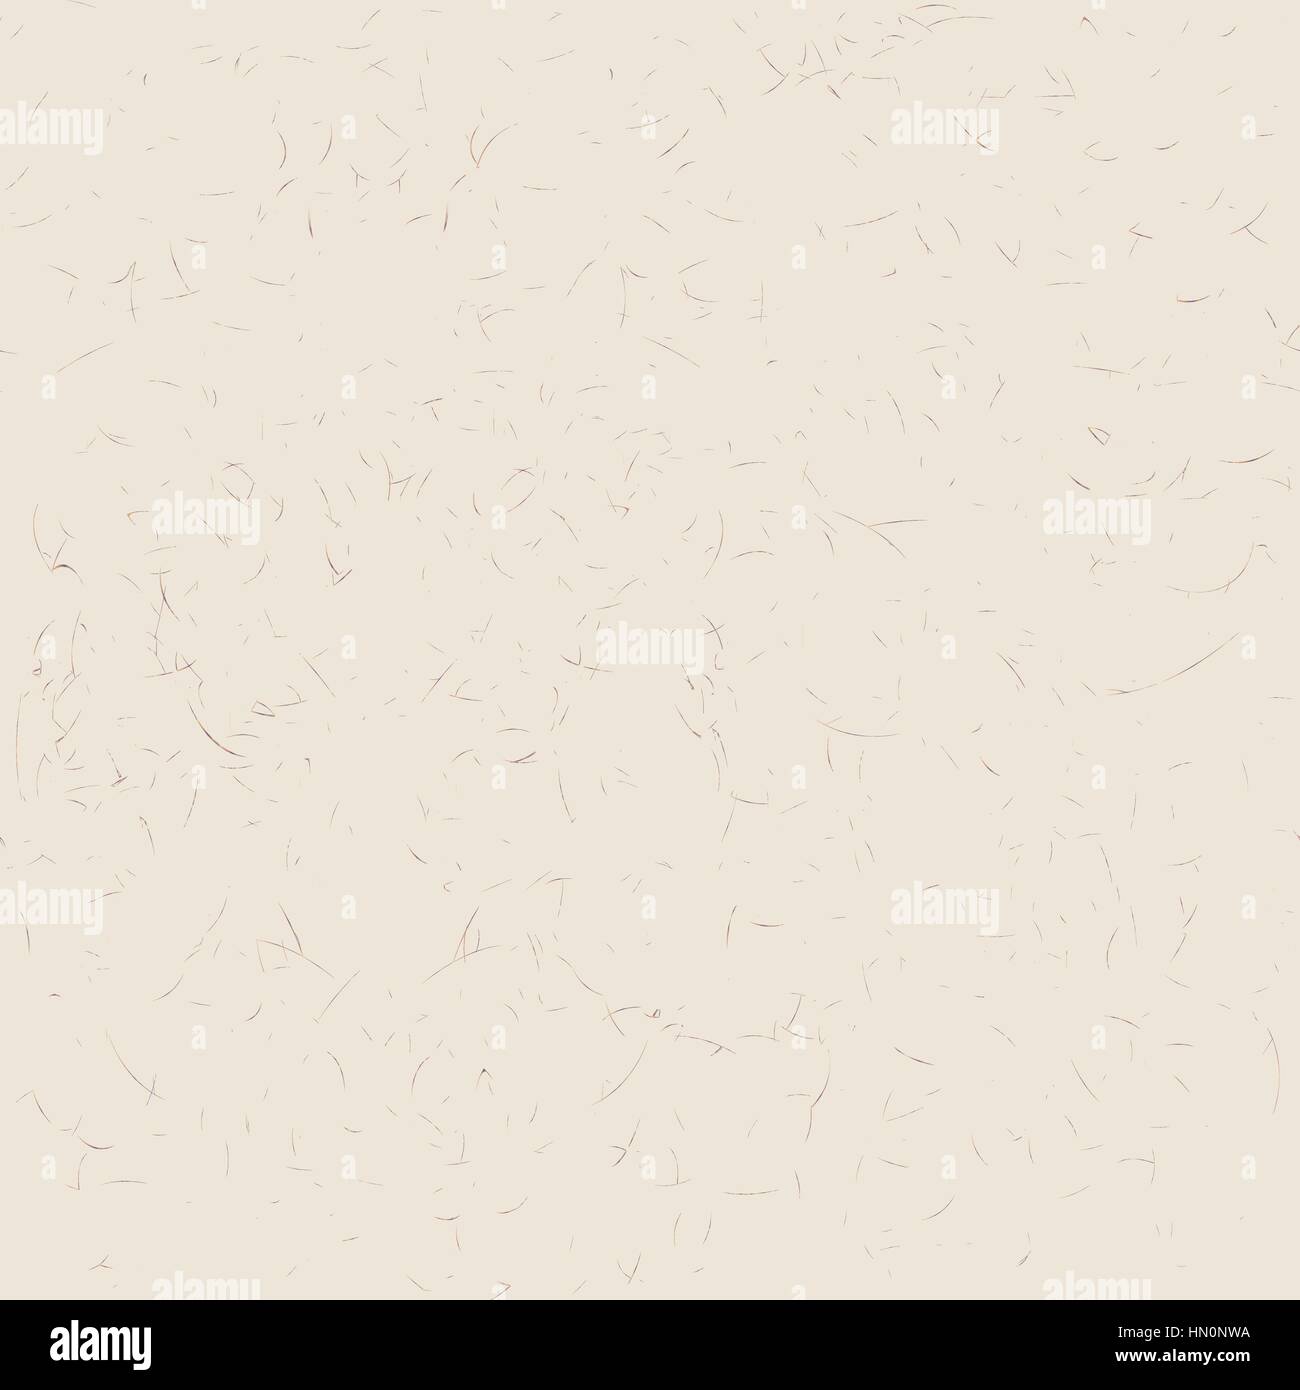 Porous grungy texture. Abstract noise pattern for grungy illustrations. Points on canvas Stock Vector